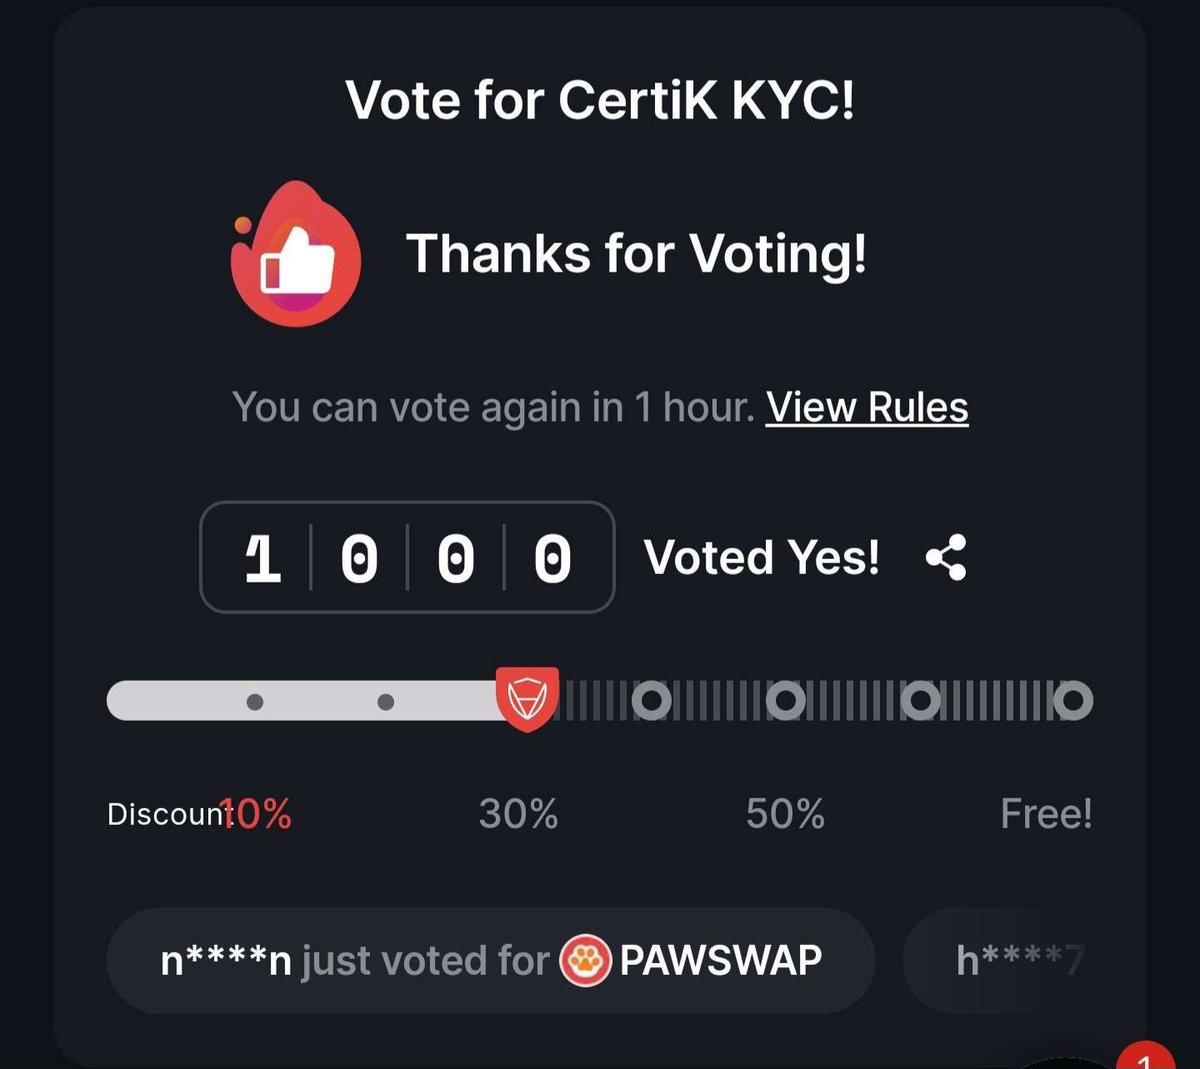 We reached 1000 votes on #Certik Thanks to all our community members for making this happen.
Let's aim for 10000 next!

#PAW #PAWSWAP